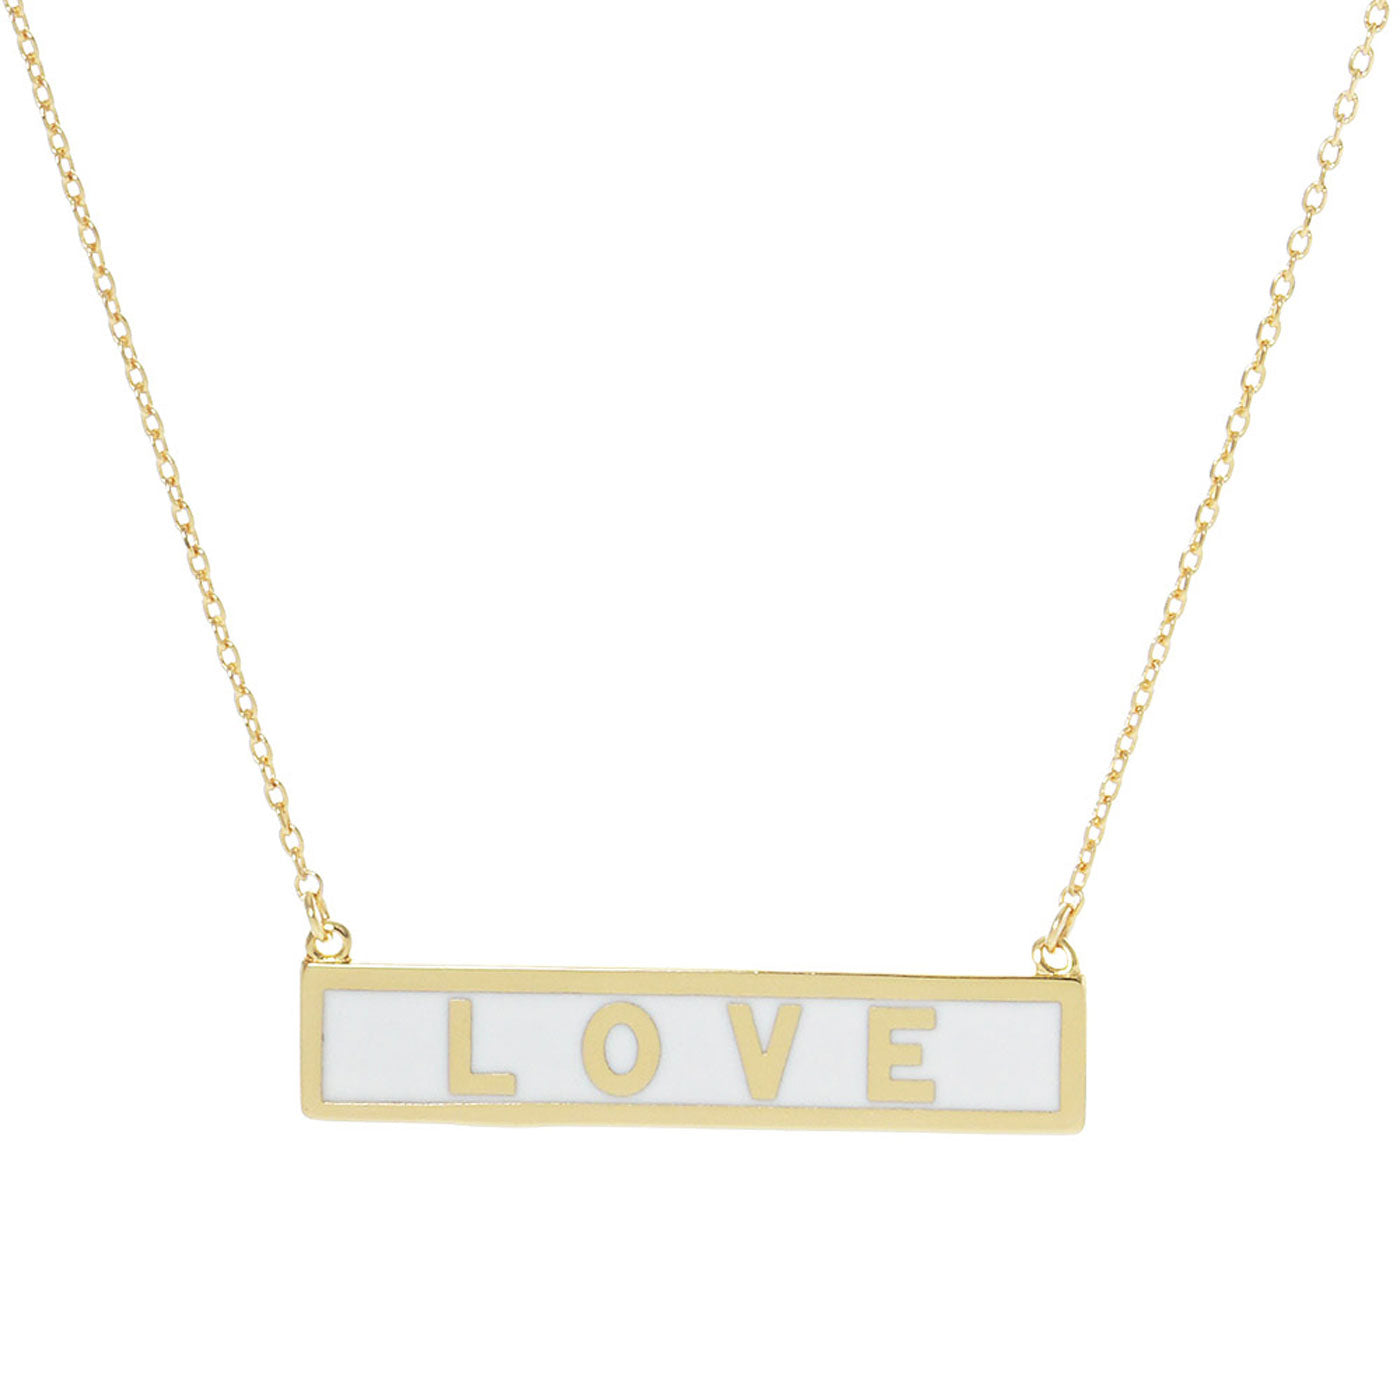 White Love Gold Dipped Enamel Rectangle Message Pendant Necklace. Beautifully crafted design adds a gorgeous glow to any outfit. Jewelry that fits your lifestyle! Perfect Birthday Gift, Valentine's Gift, Anniversary Gift, Mother's Day Gift, Anniversary Gift, Graduation Gift, Prom Jewelry, Just Because Gift, Thank you Gift.